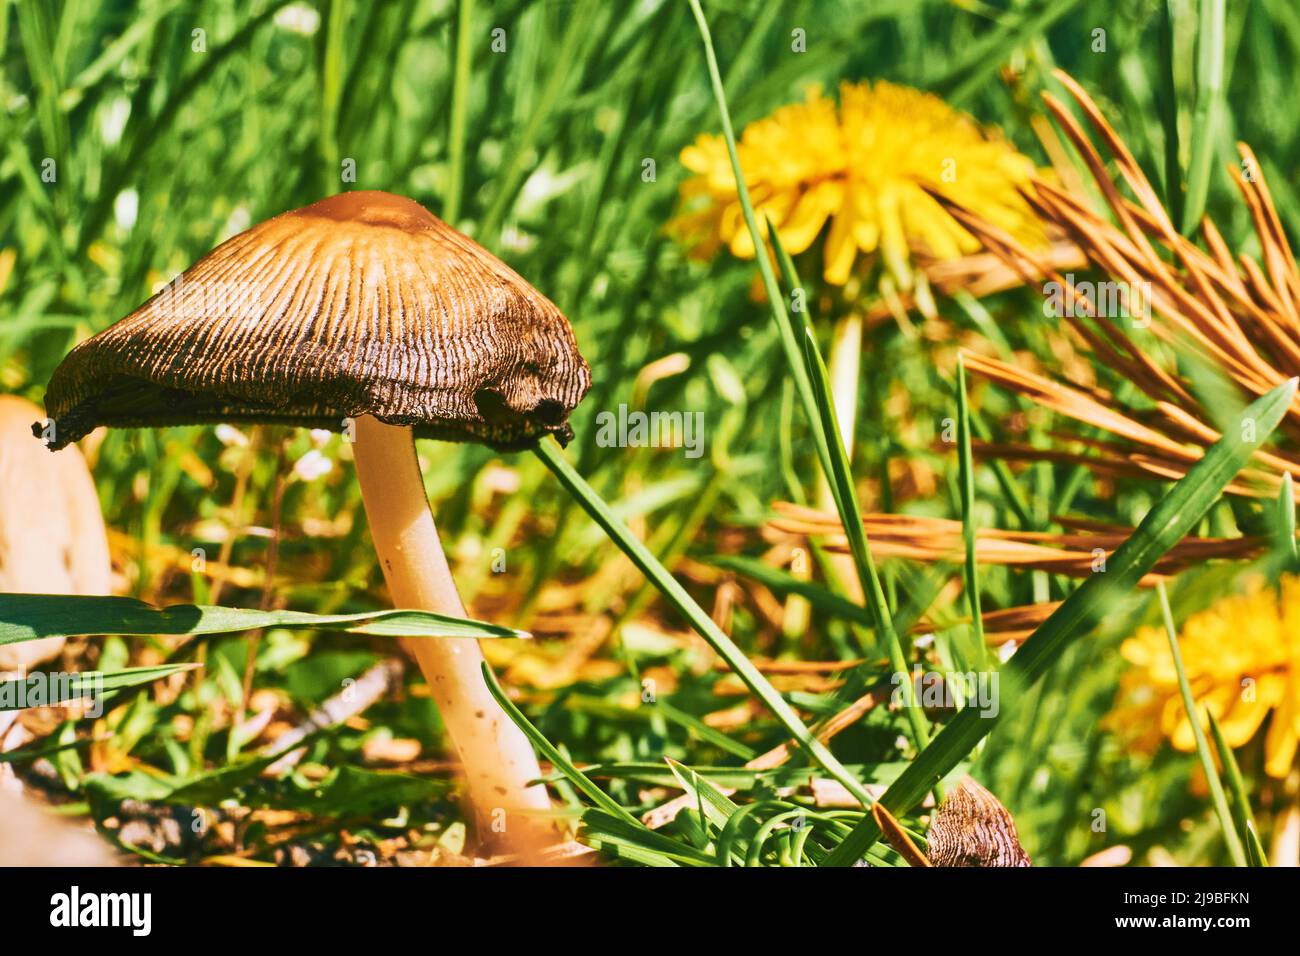 Red mushroom among green grass with dandelion on a sunny summer warm day Stock Photo